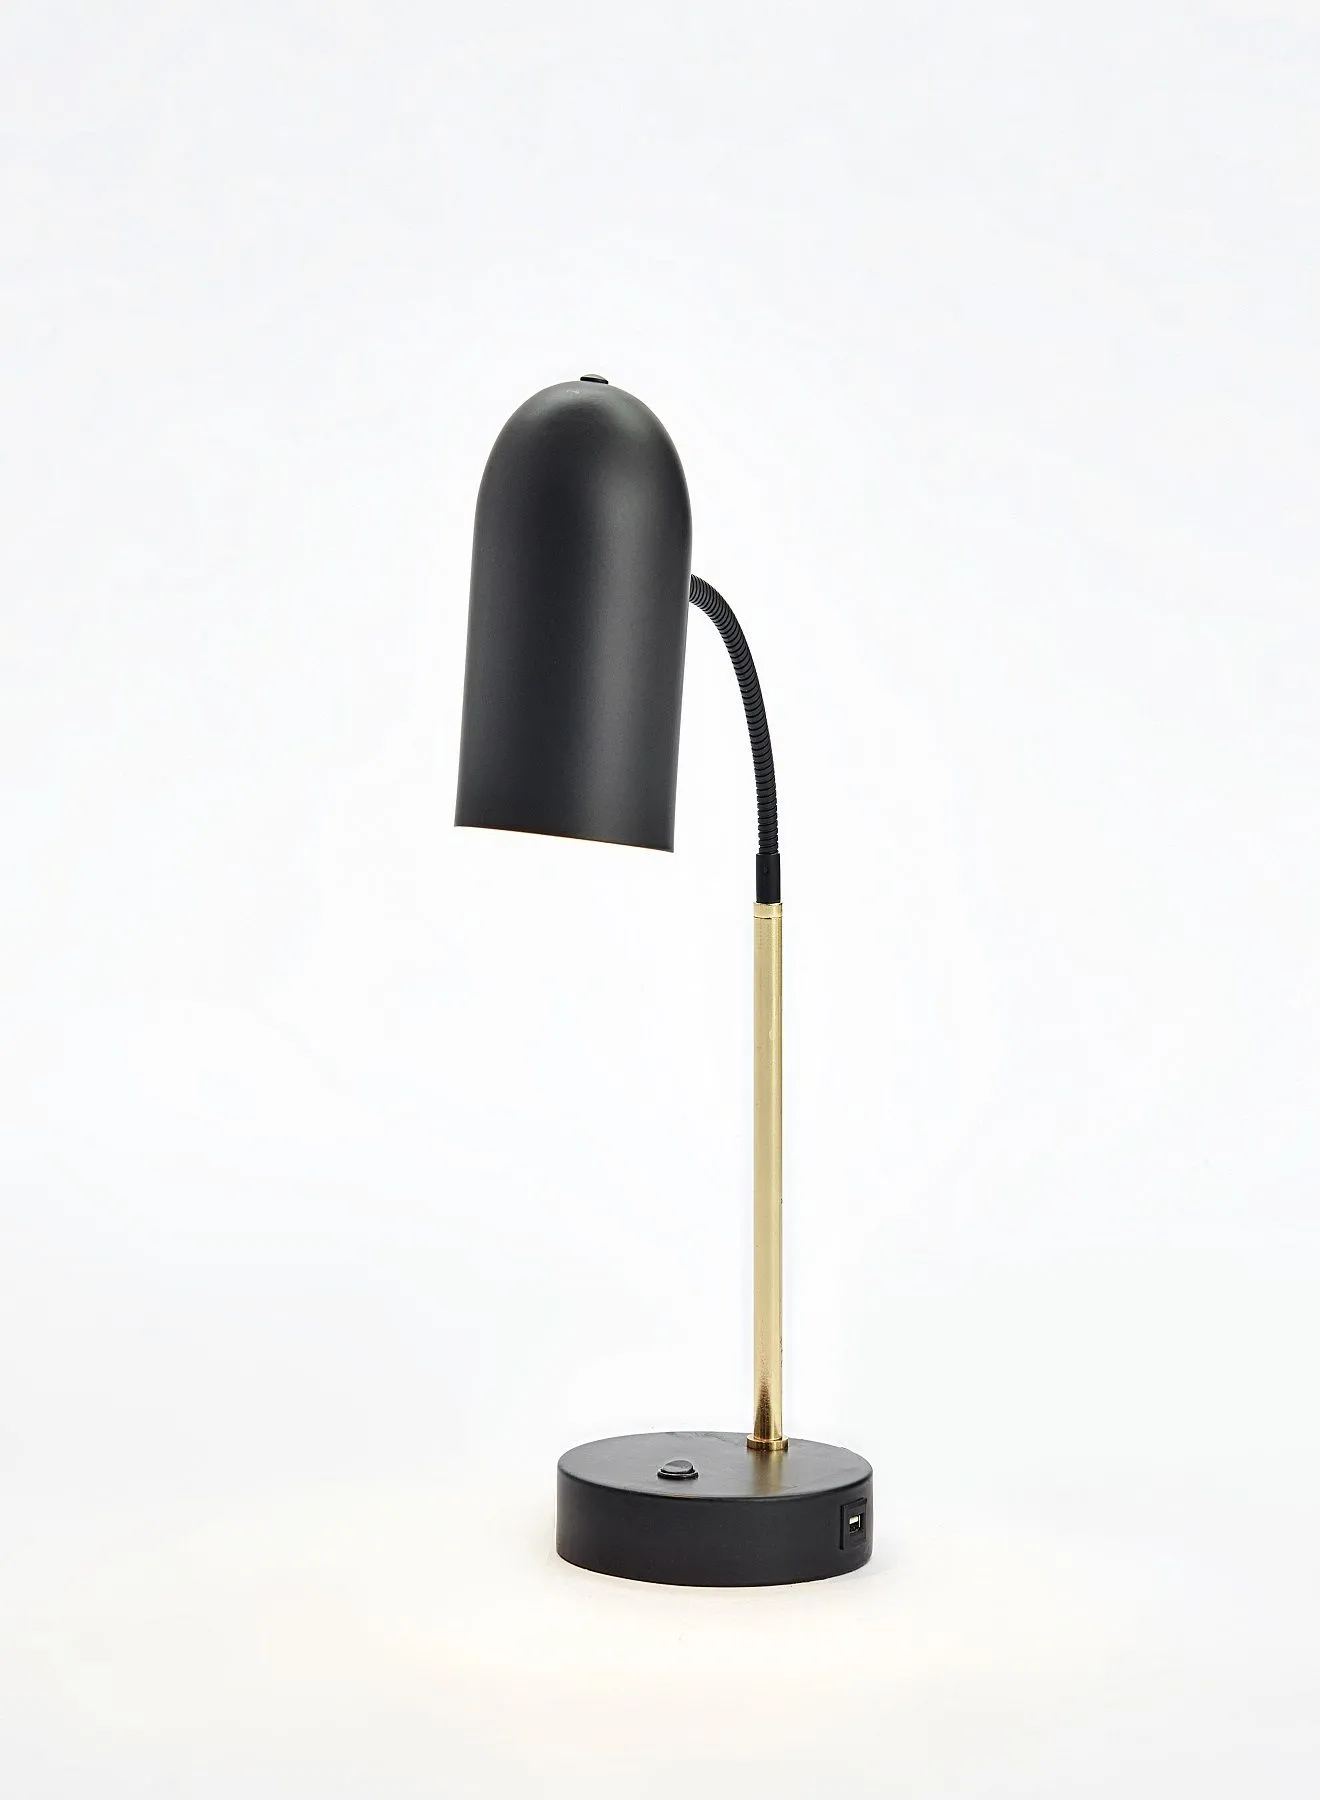 Switch Decorative Table Lamp Unique Luxury Quality Material for the Perfect Stylish Home TL000005 Black/Gold 15 x 42.4cm